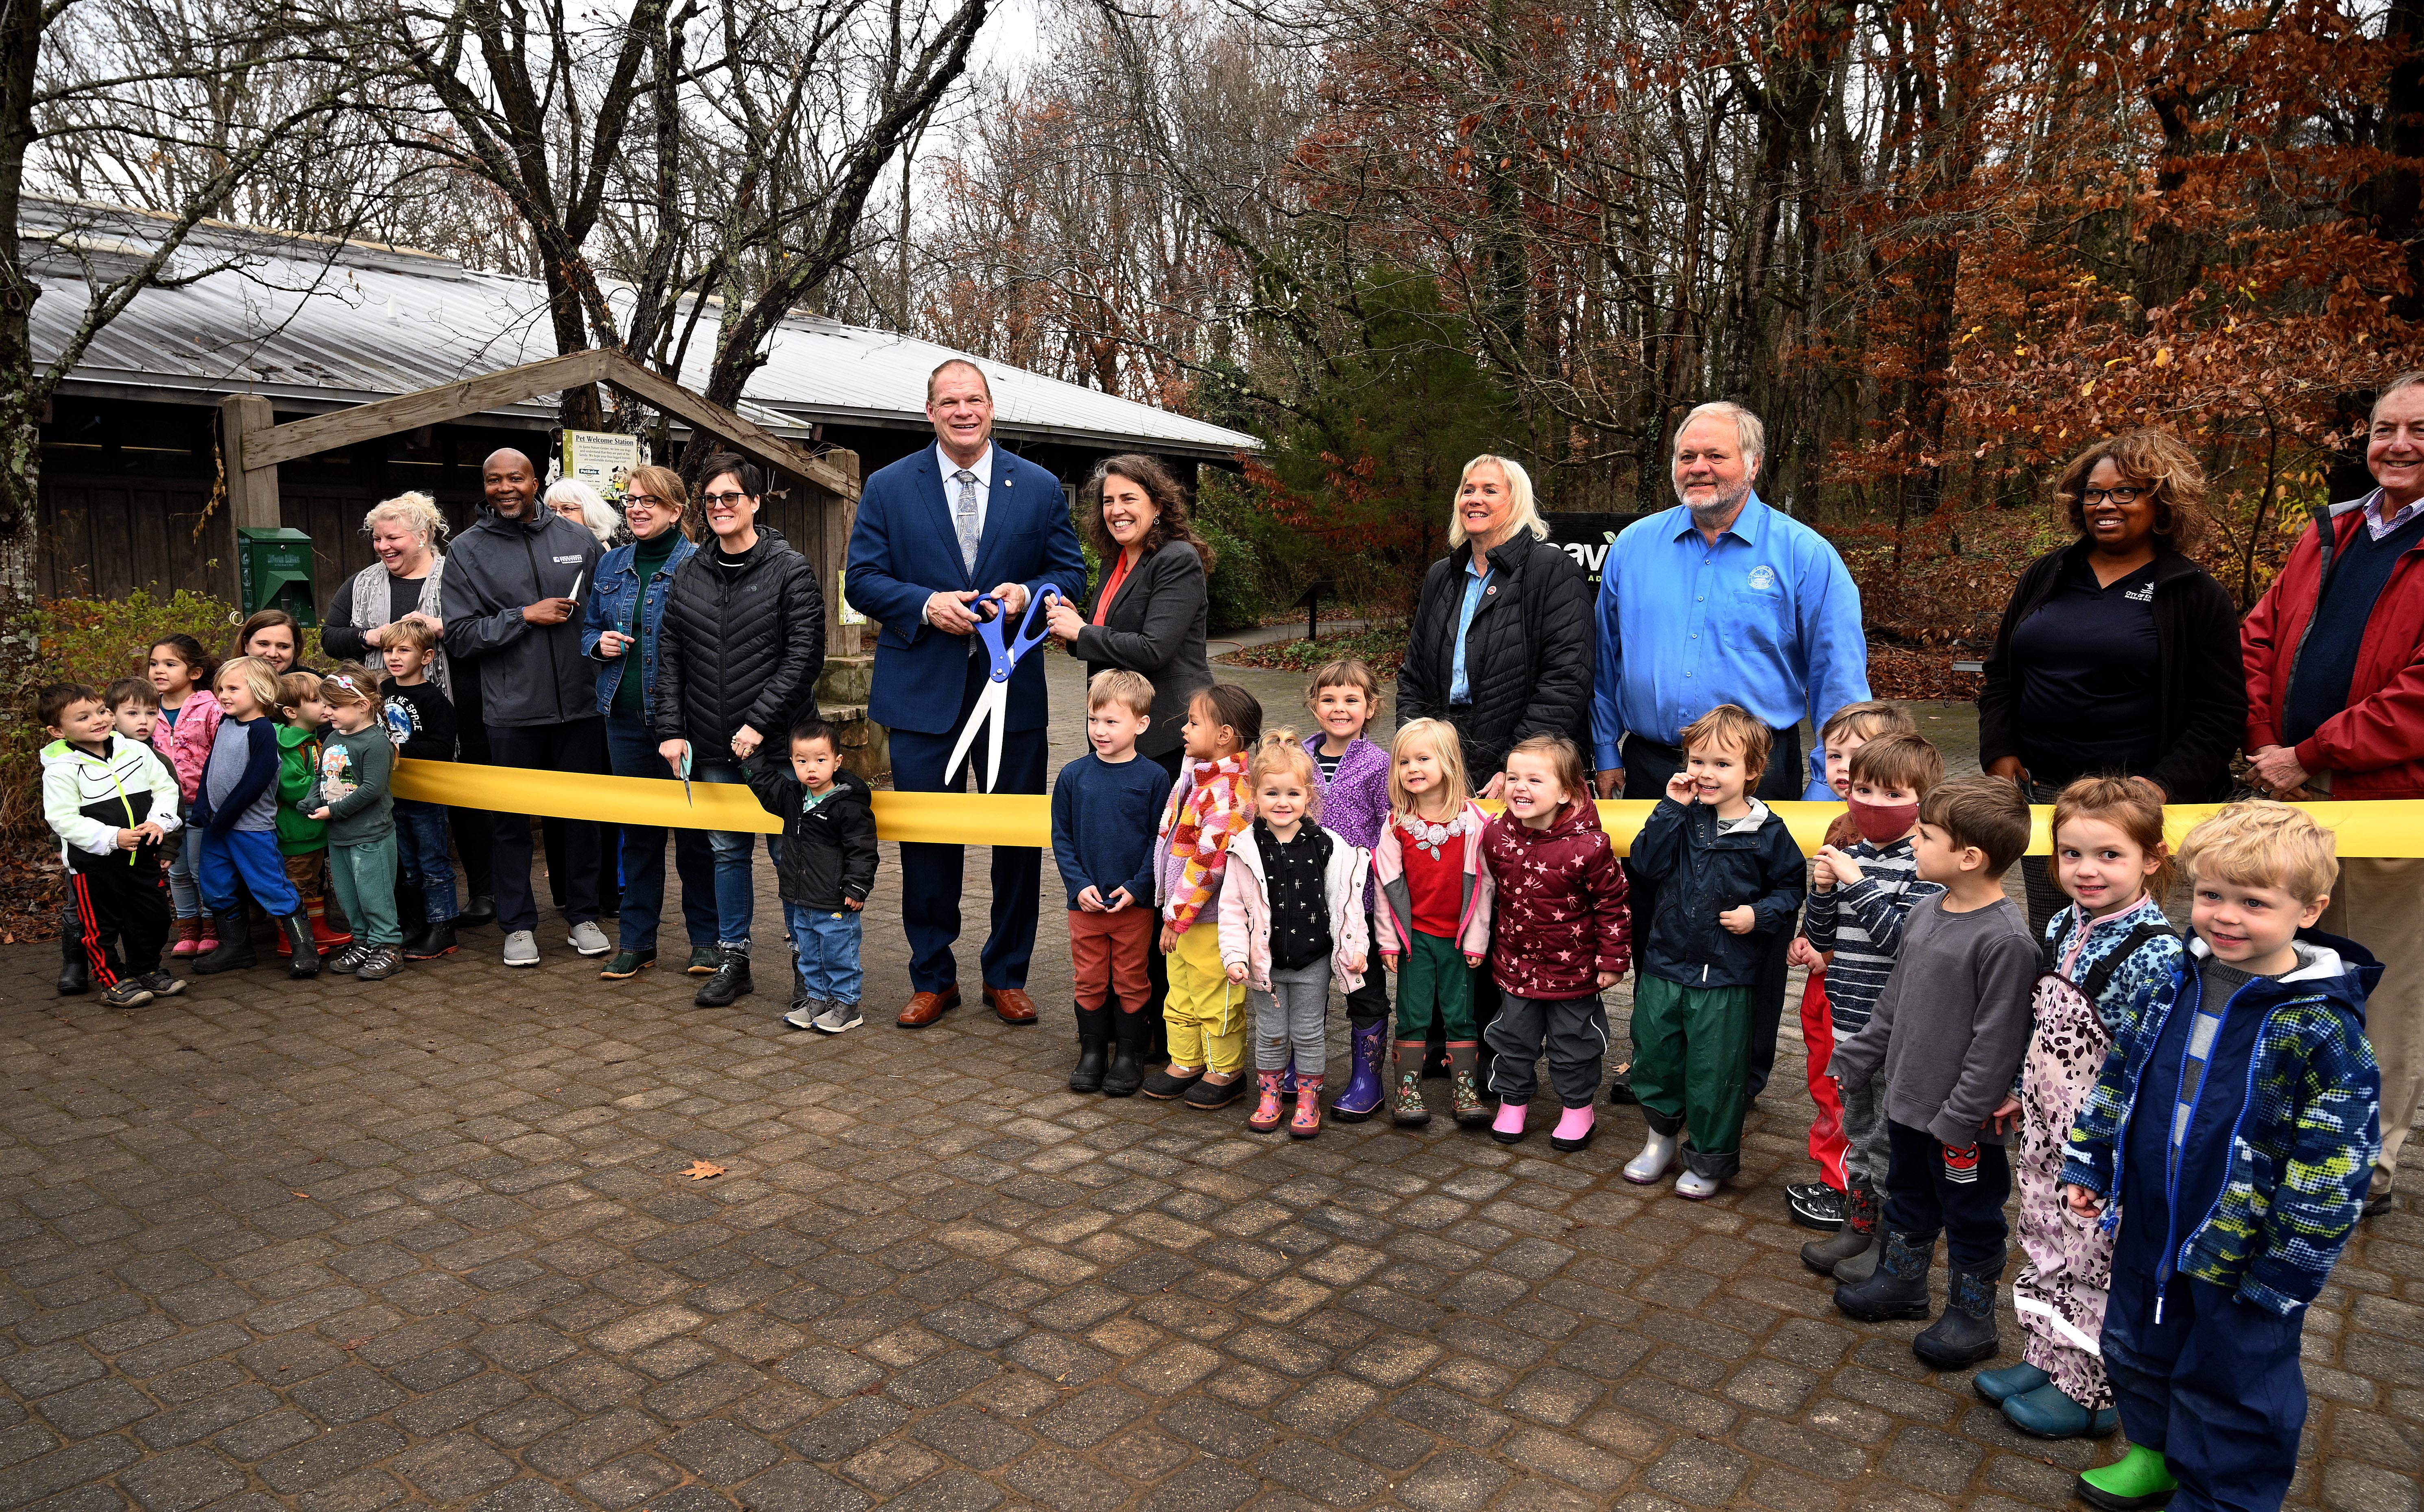 more than a dozen preschool children stand in front of large yellow ribbon with dignitaries behind holding scissors